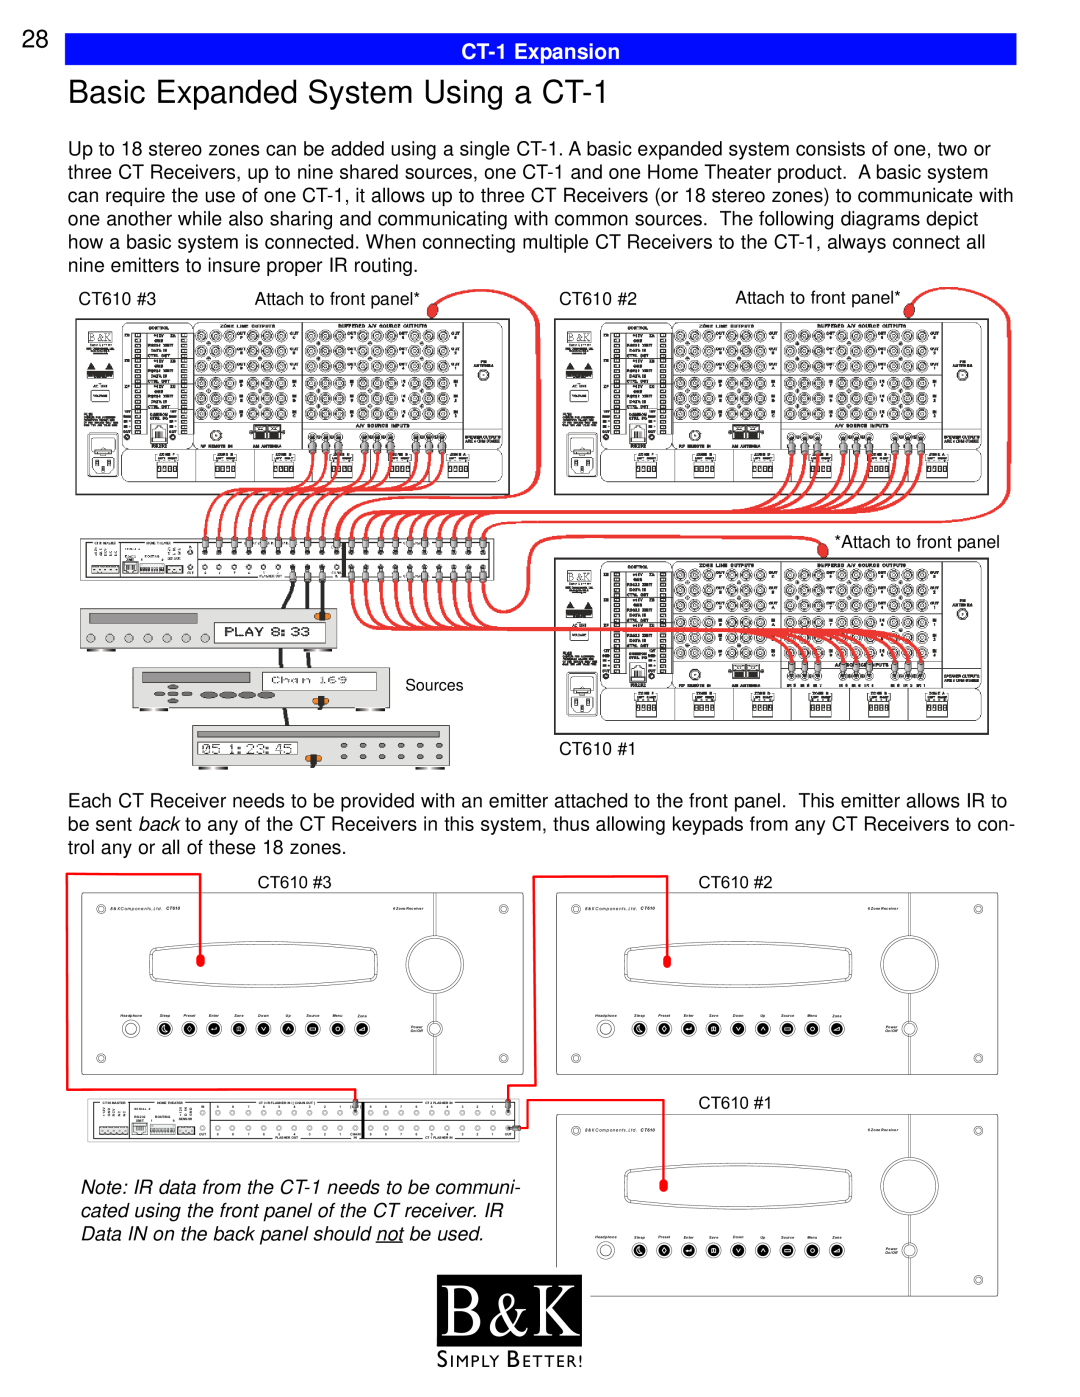 B&K CT310, CT600, CT602, CT610, CT300 user manual Basic Expanded System Using a CT-1, B & K, CT-1Expansion 